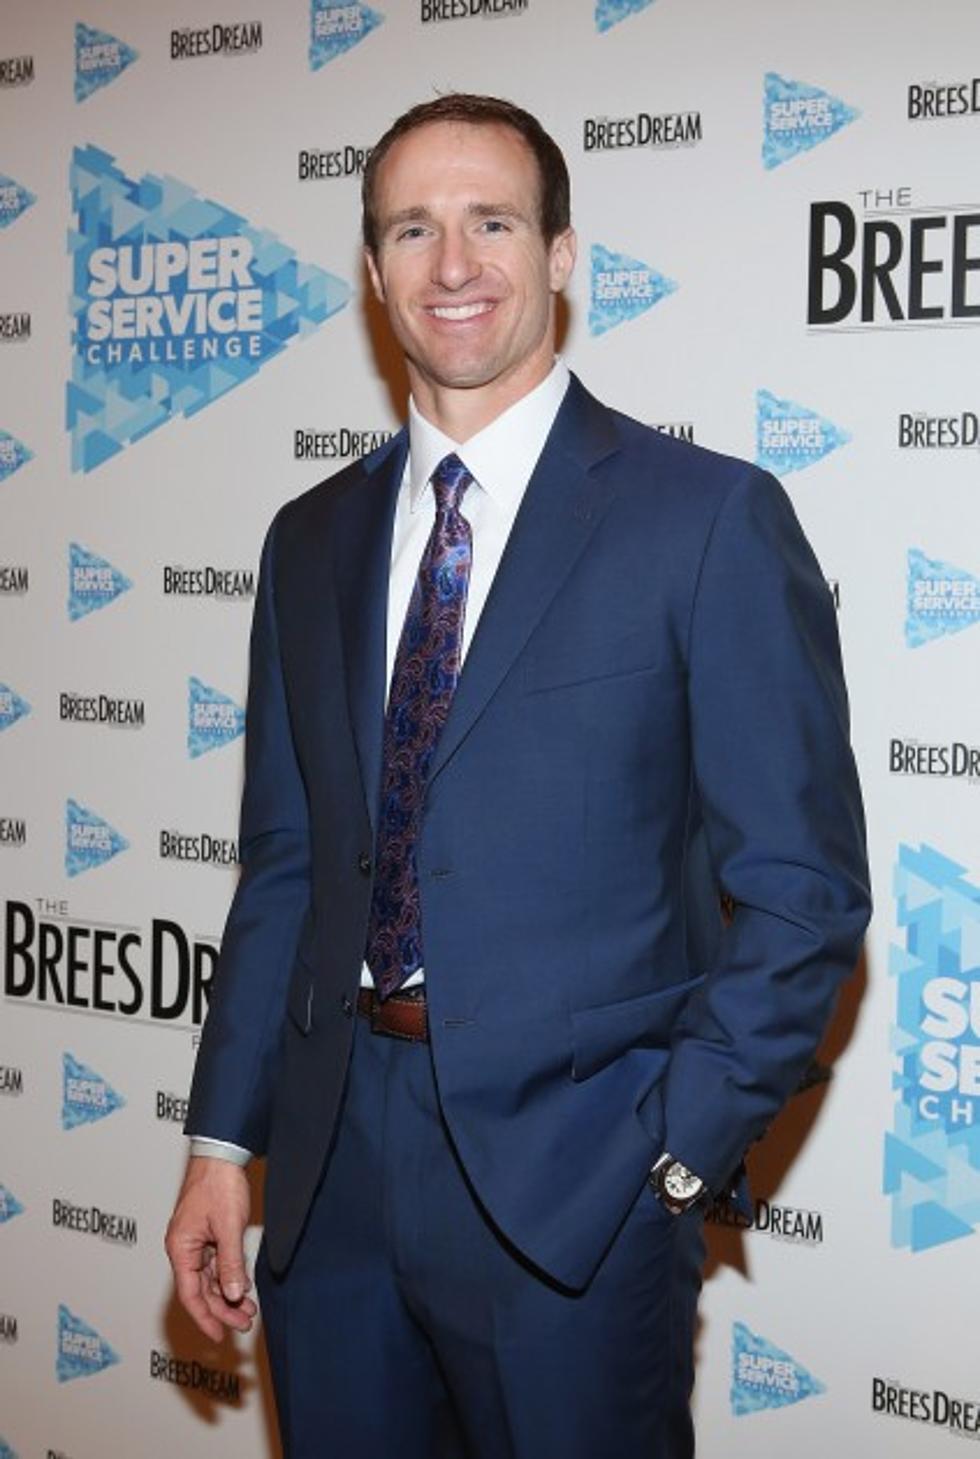 Walk On&#8217;s Franchise A Sure Deal With Saints Quarterback Drew Brees On Board [VIDEO]